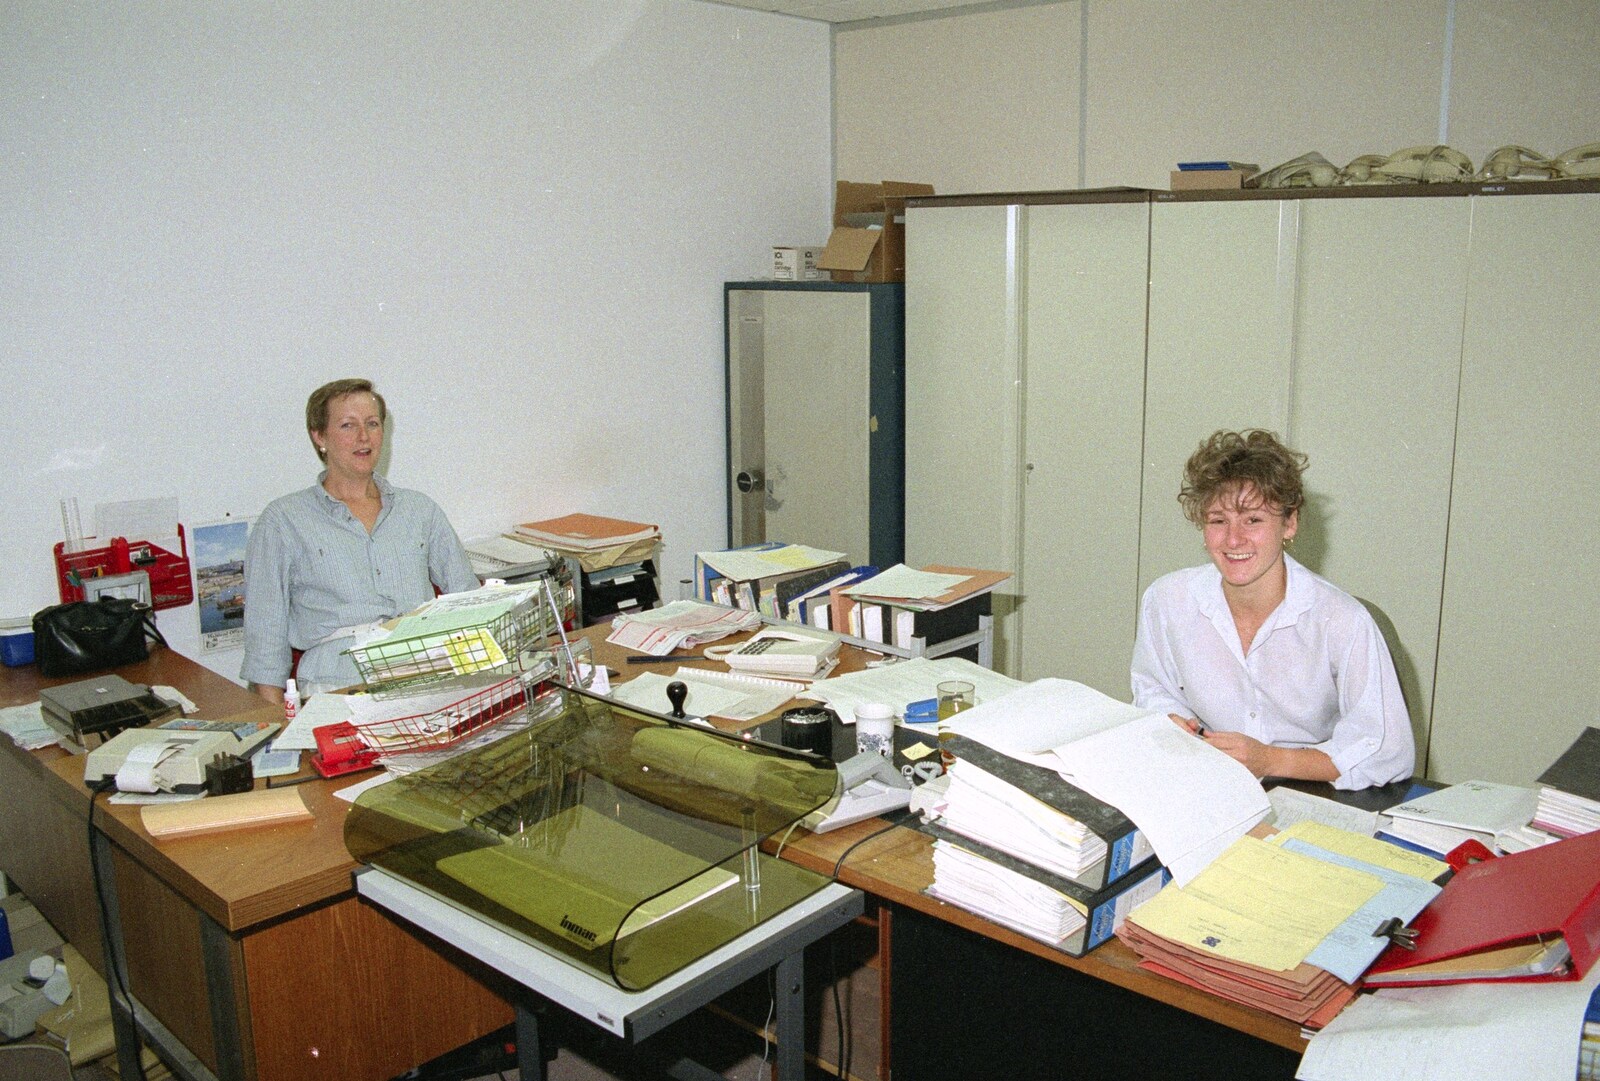 Kim and Tanya in the office from Nosher Leaves BPCC Business Magazines, Colchester, Essex - 18th July 1991